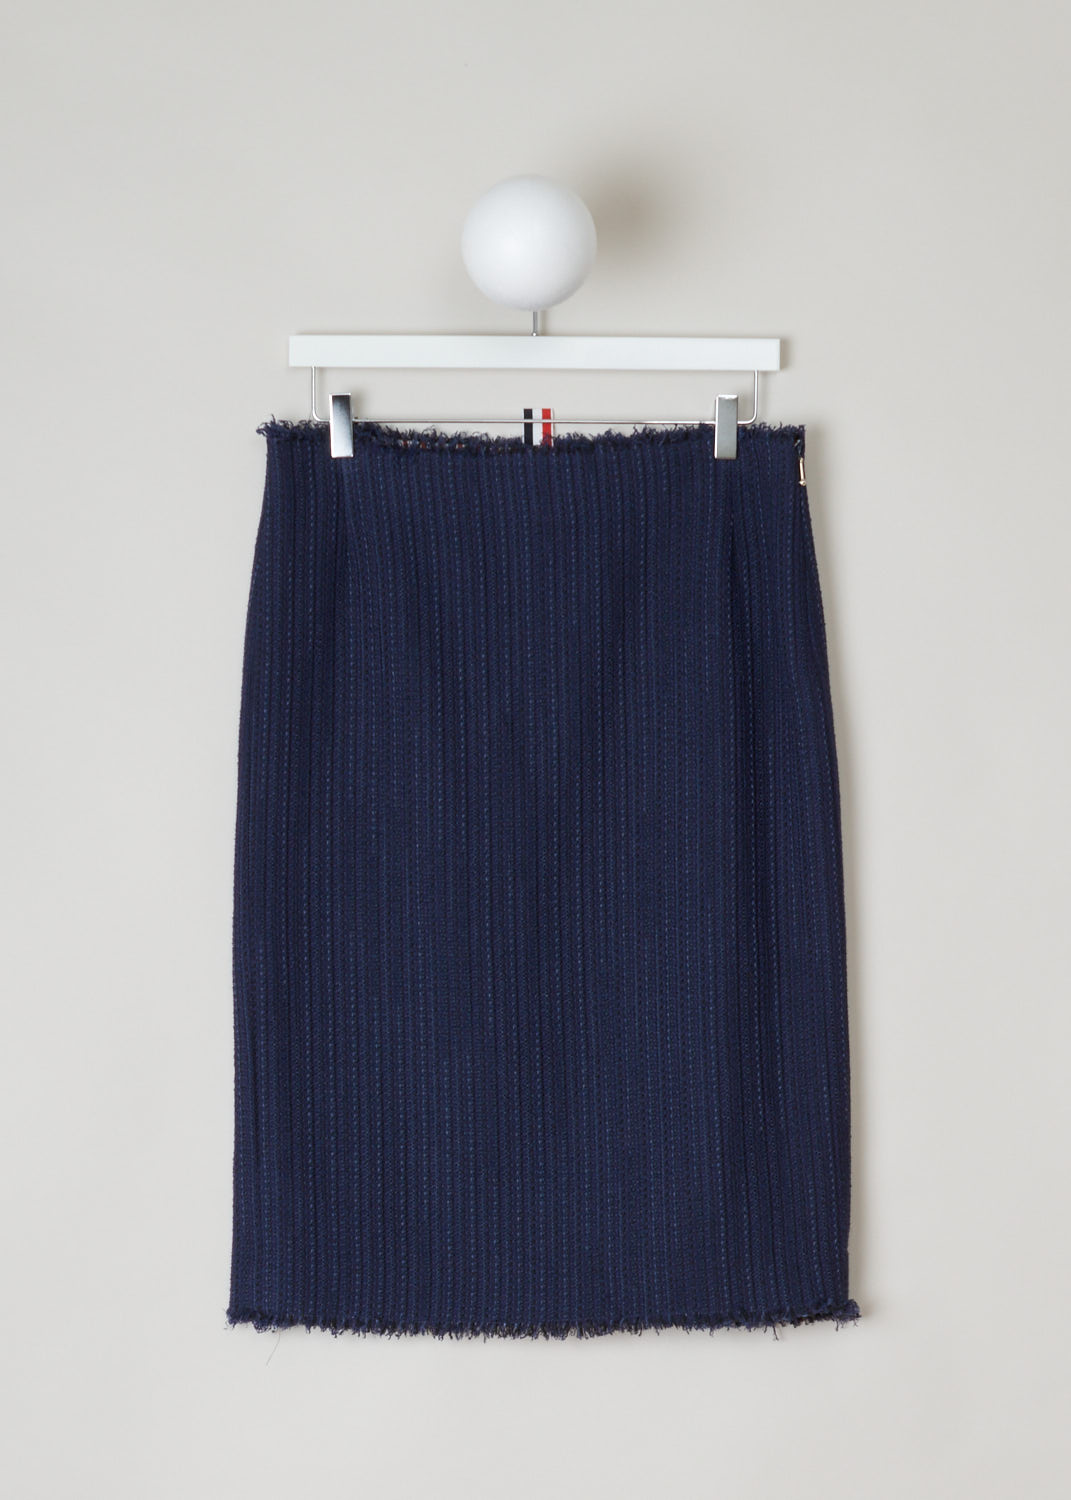 Thom Browne, Blue knitted pencil skirt, FGC452T_04529_415_navy, blue, front. Starting from the top this lovely pencil skirt has raw frilled edges. Zipper on the side for fastening. Also the hem is similarly unfinished and has frills hanging off. On the back this model has two splits.